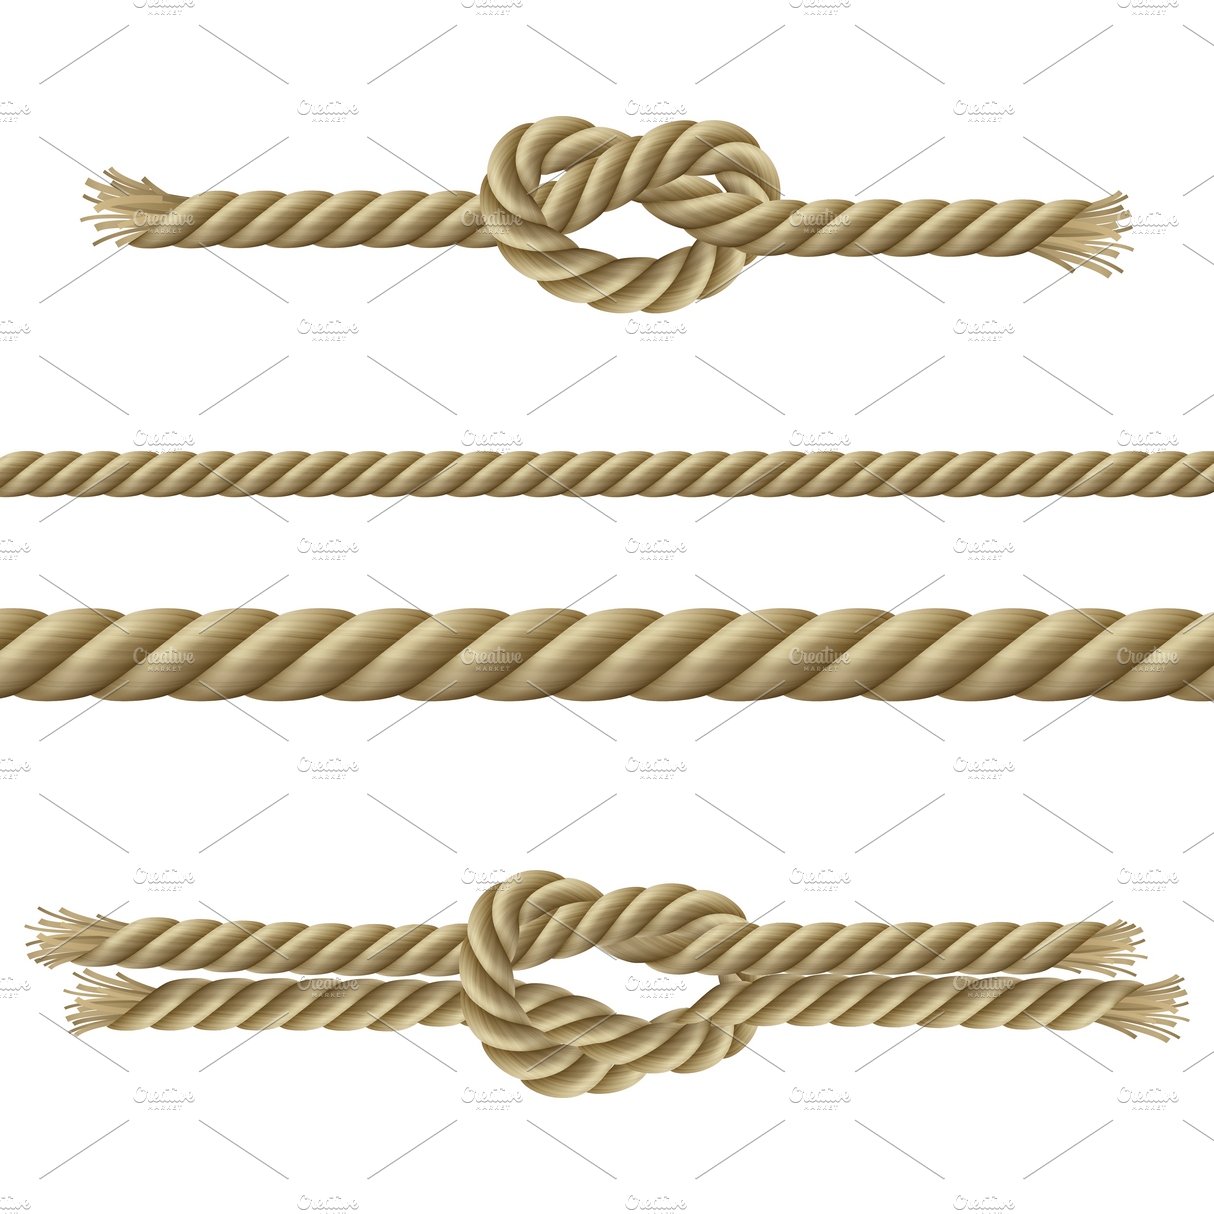 Twisted ropes nodes set cover image.